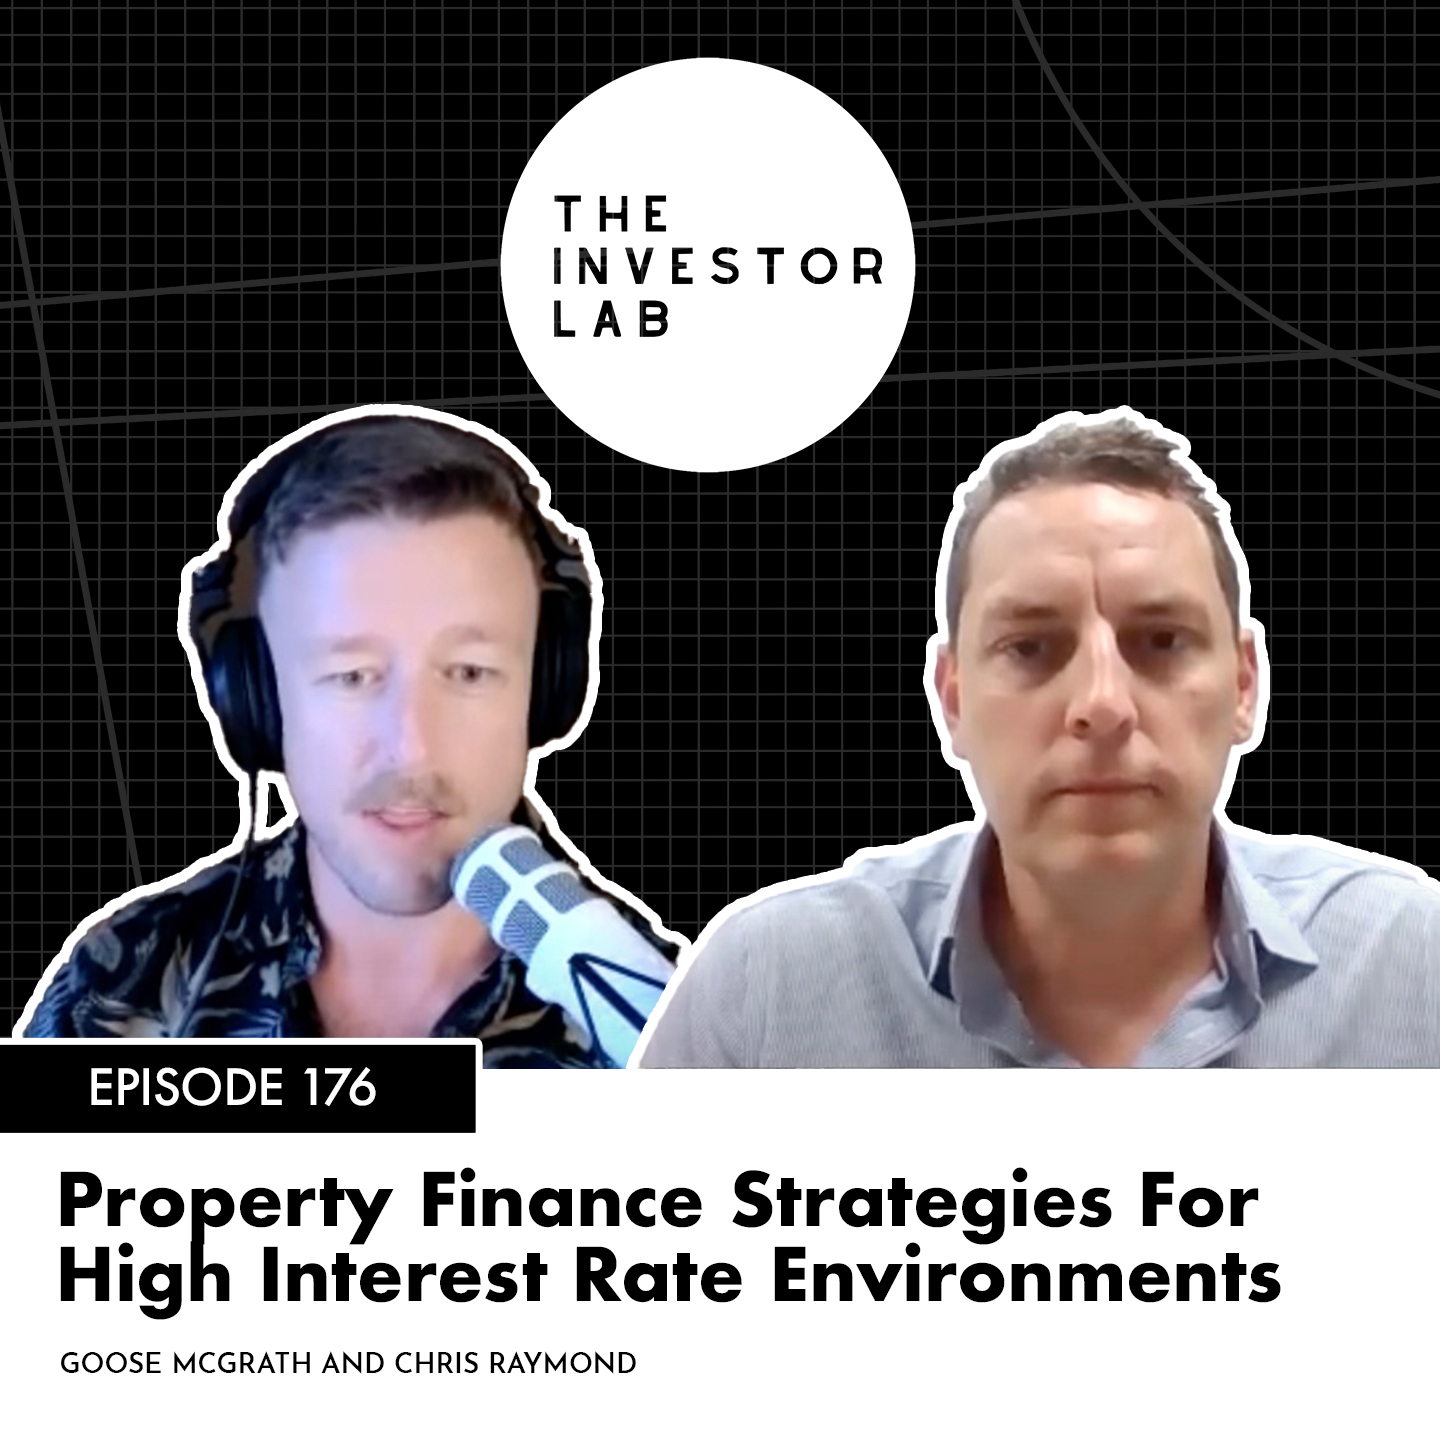 Property Finance Strategies For High Interest Rate Environments